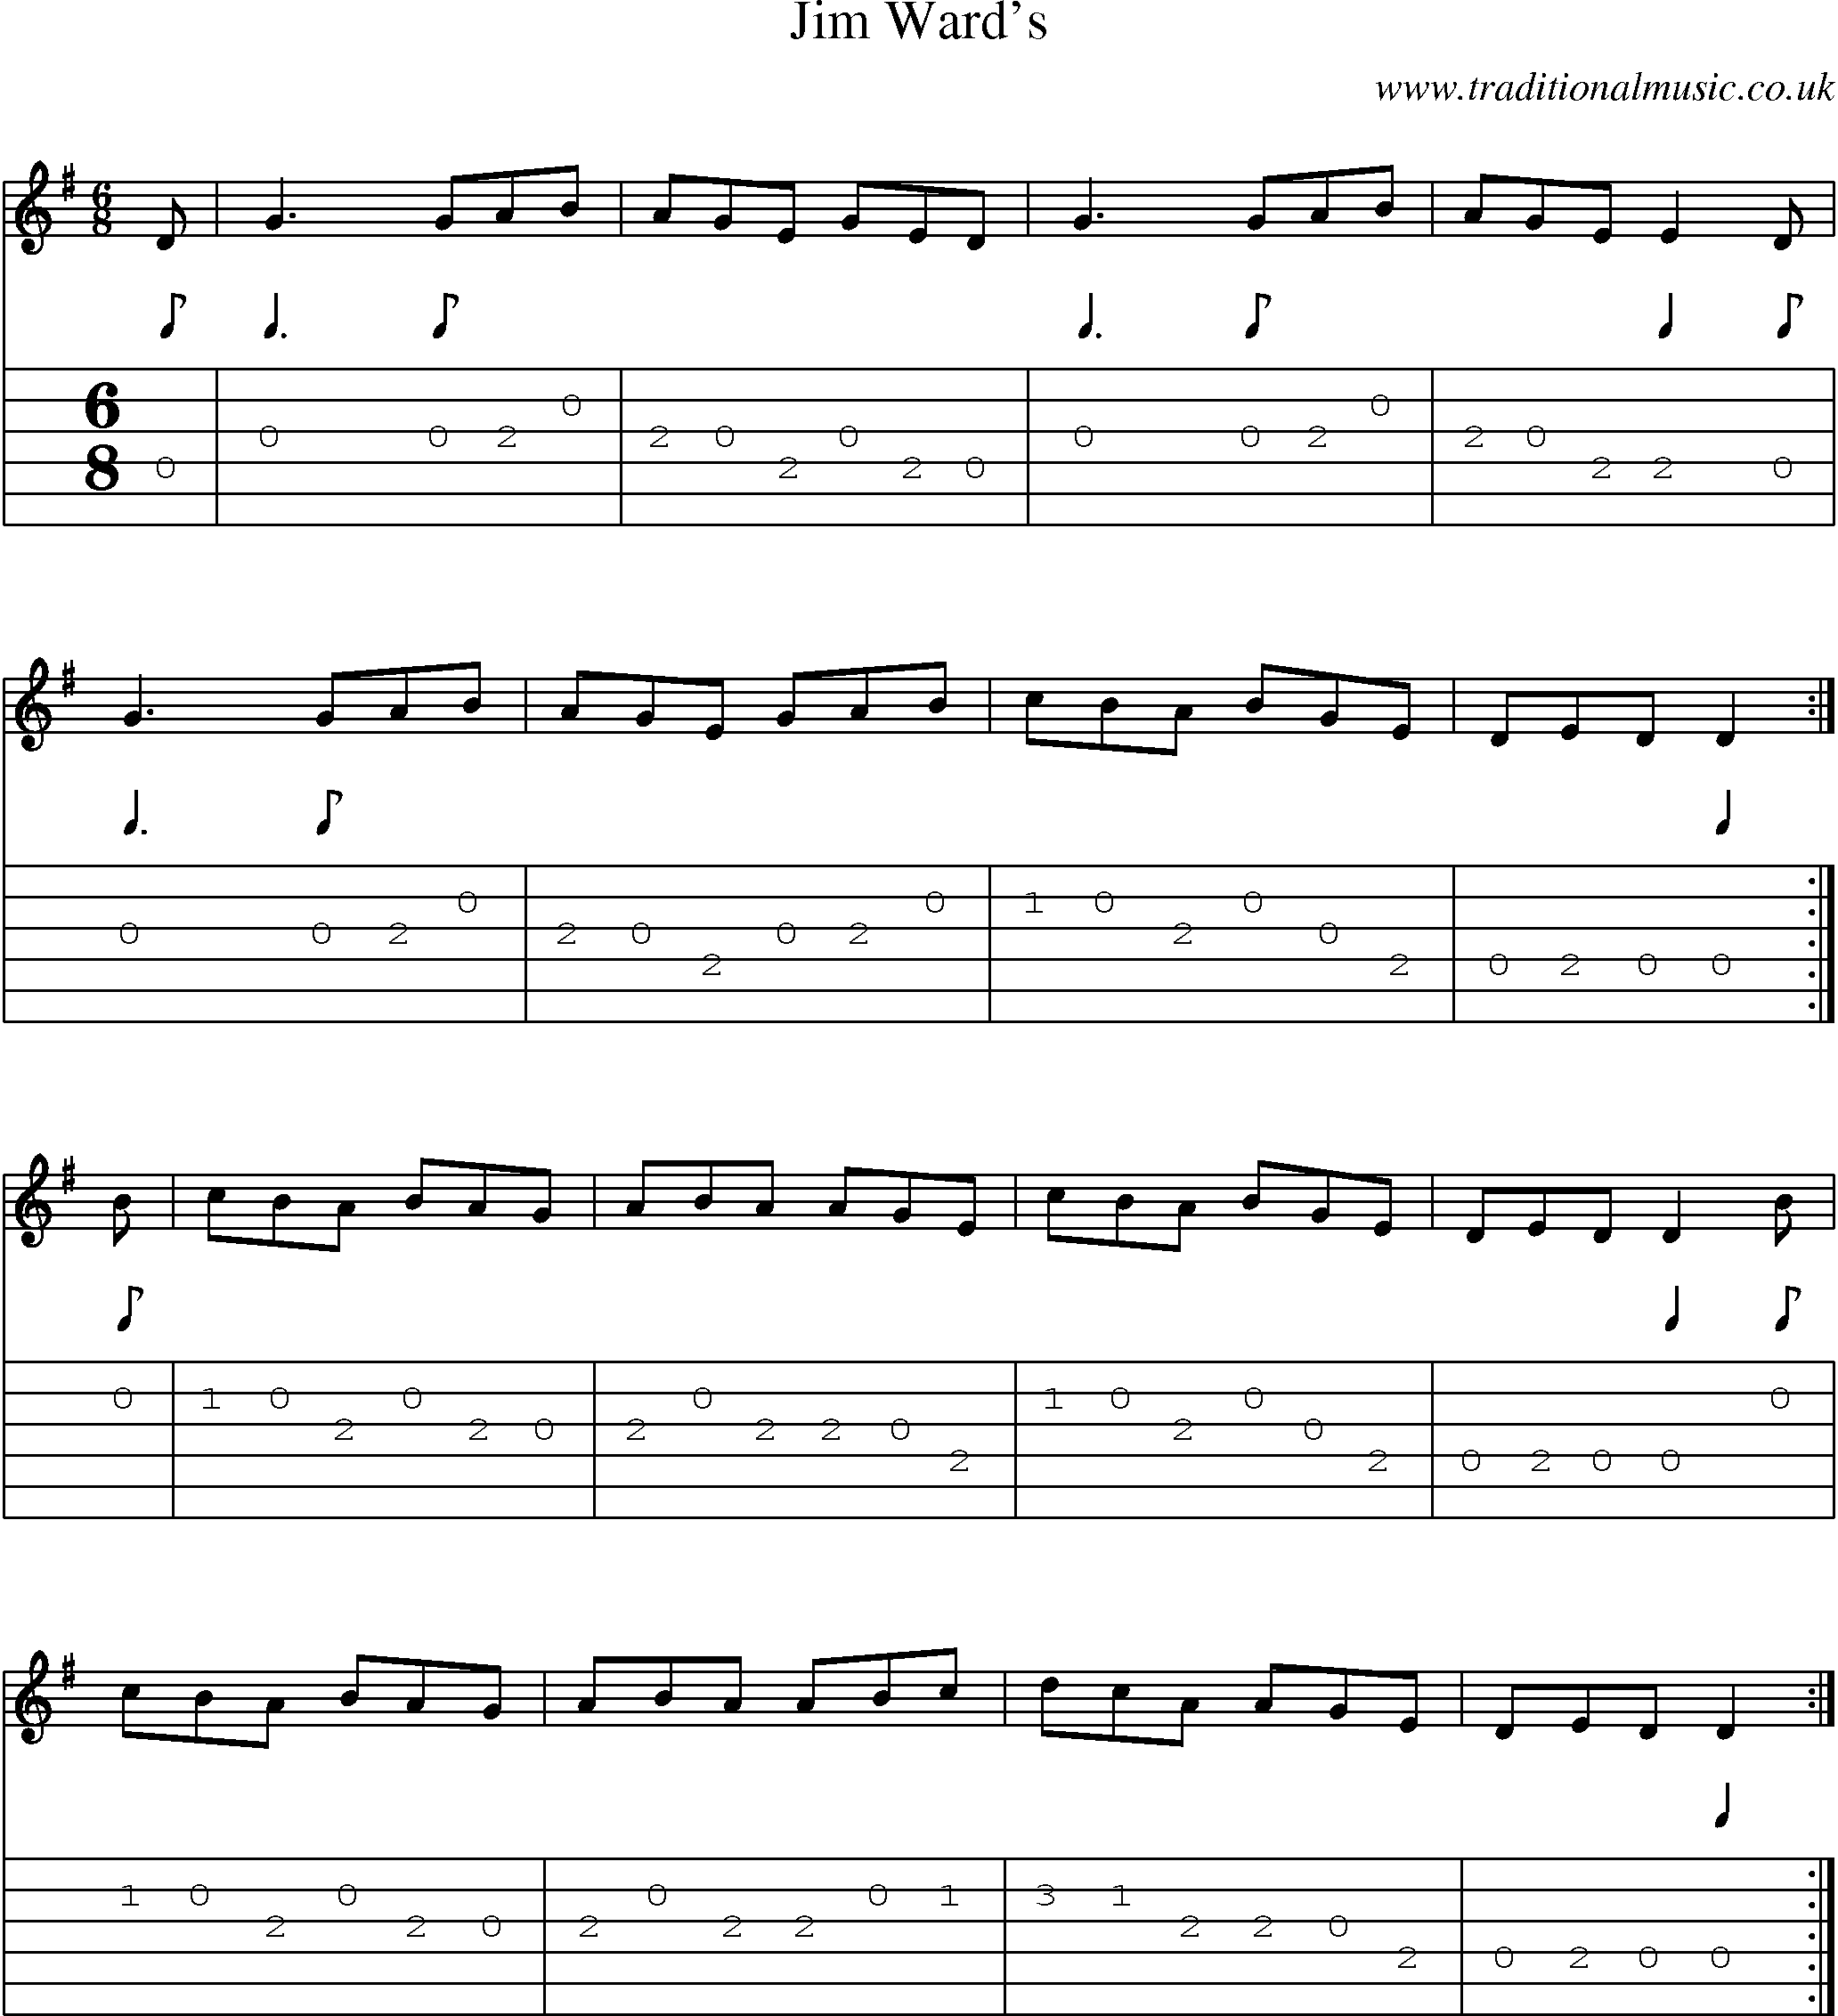 Music Score and Guitar Tabs for Jim Wards